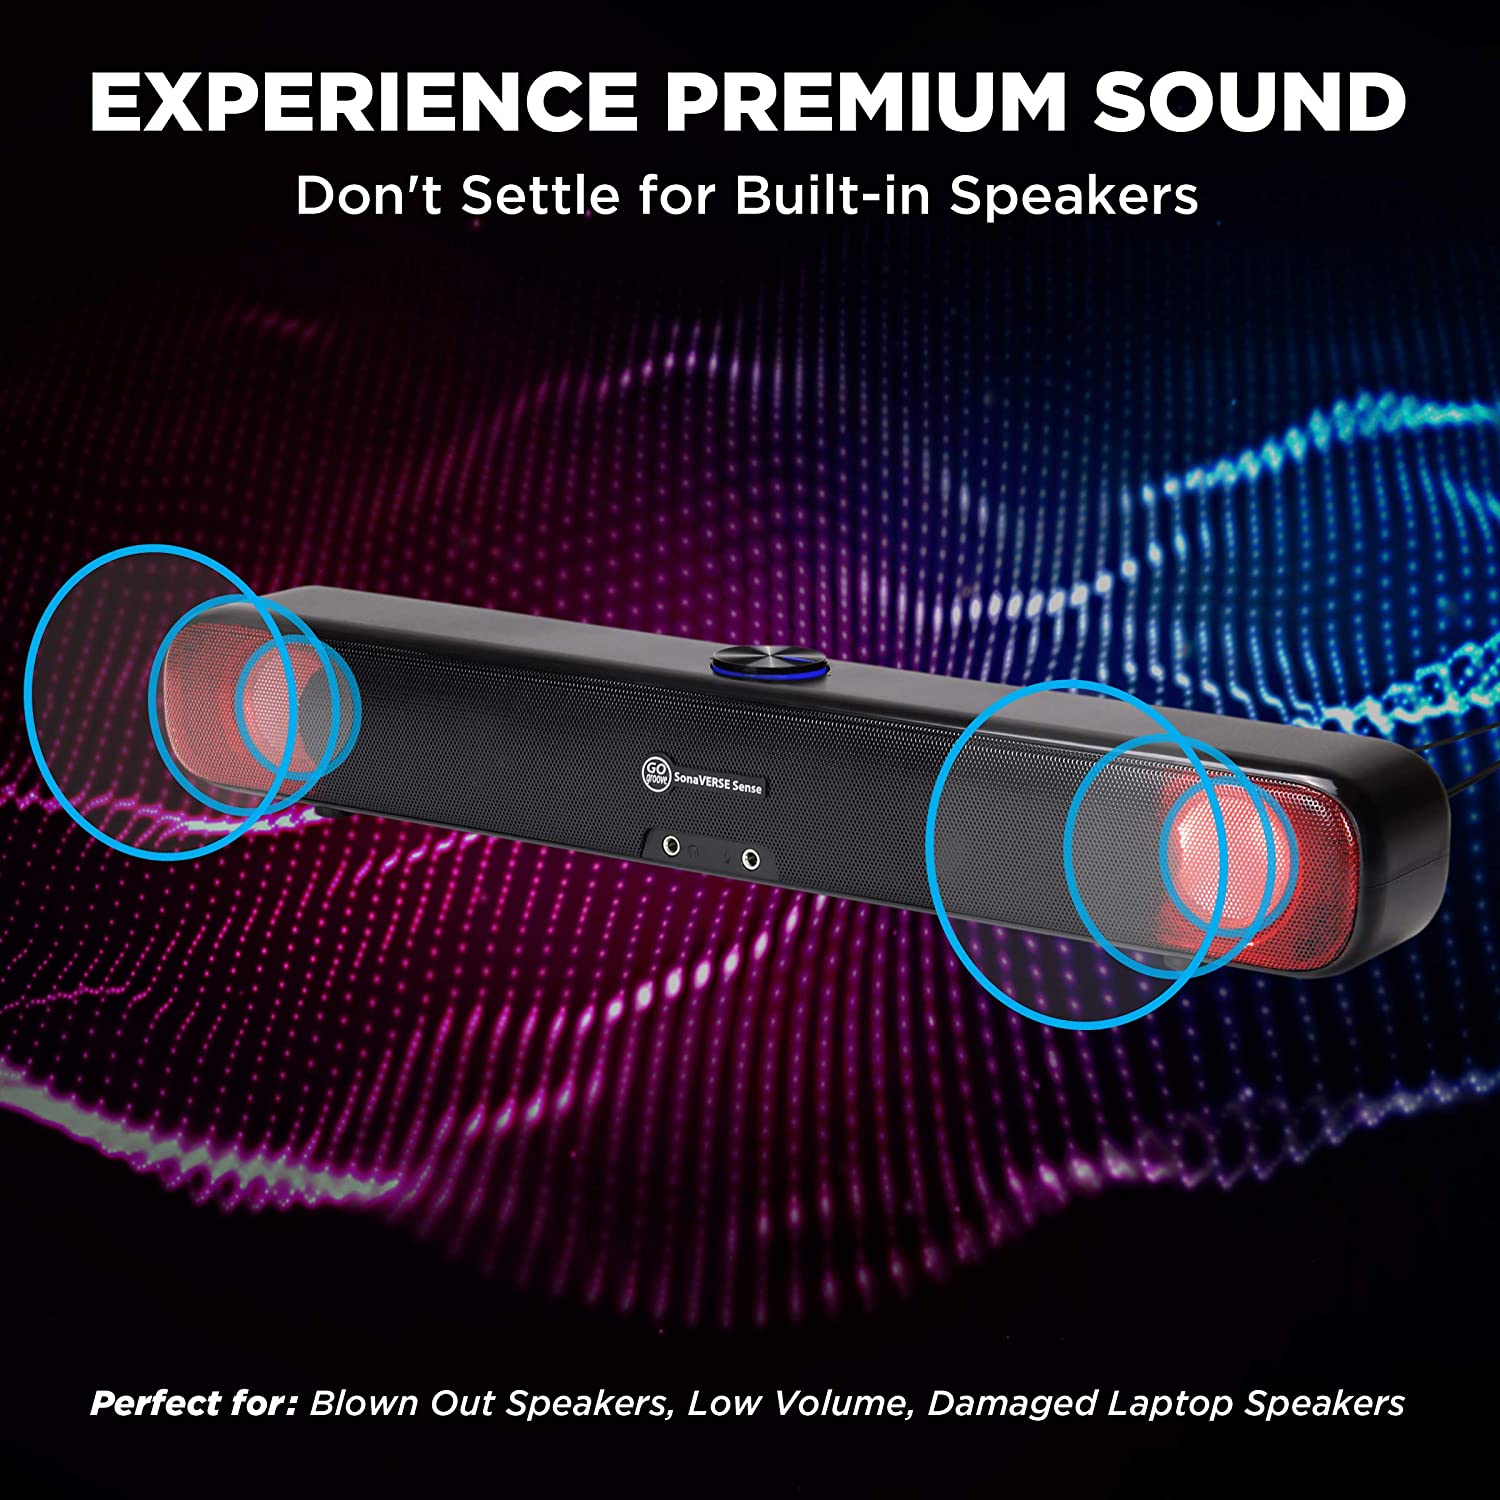 GOgroove Computer Speaker LED Sound Bar - SonaVERSE Sense USB Powered Desktop Computer Speaker for PC, Laptop with Glowing LED Lights, Stereo Drivers, Headphone and Microphone Ports, Wired AUX Input - image 5 of 9